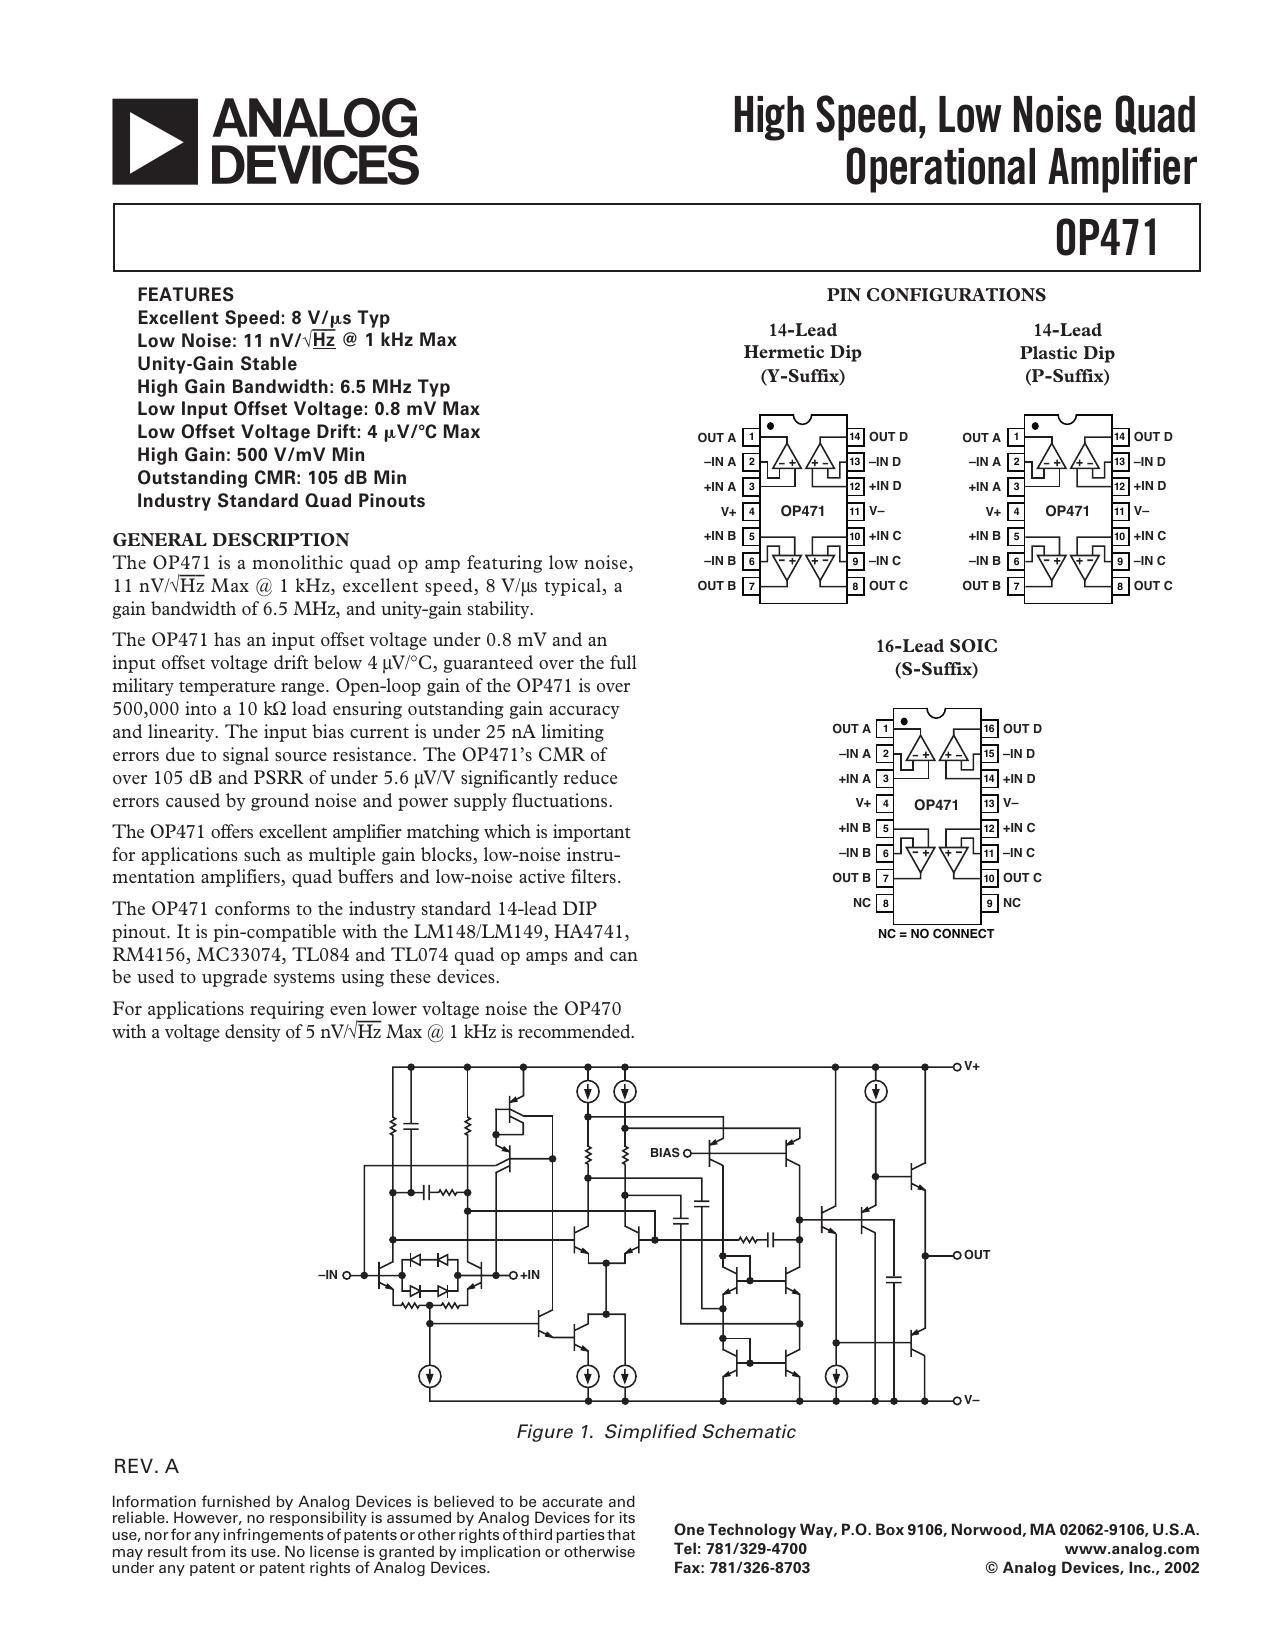 op471-high-speed-low-noise-quad-operational-amplifier.pdf